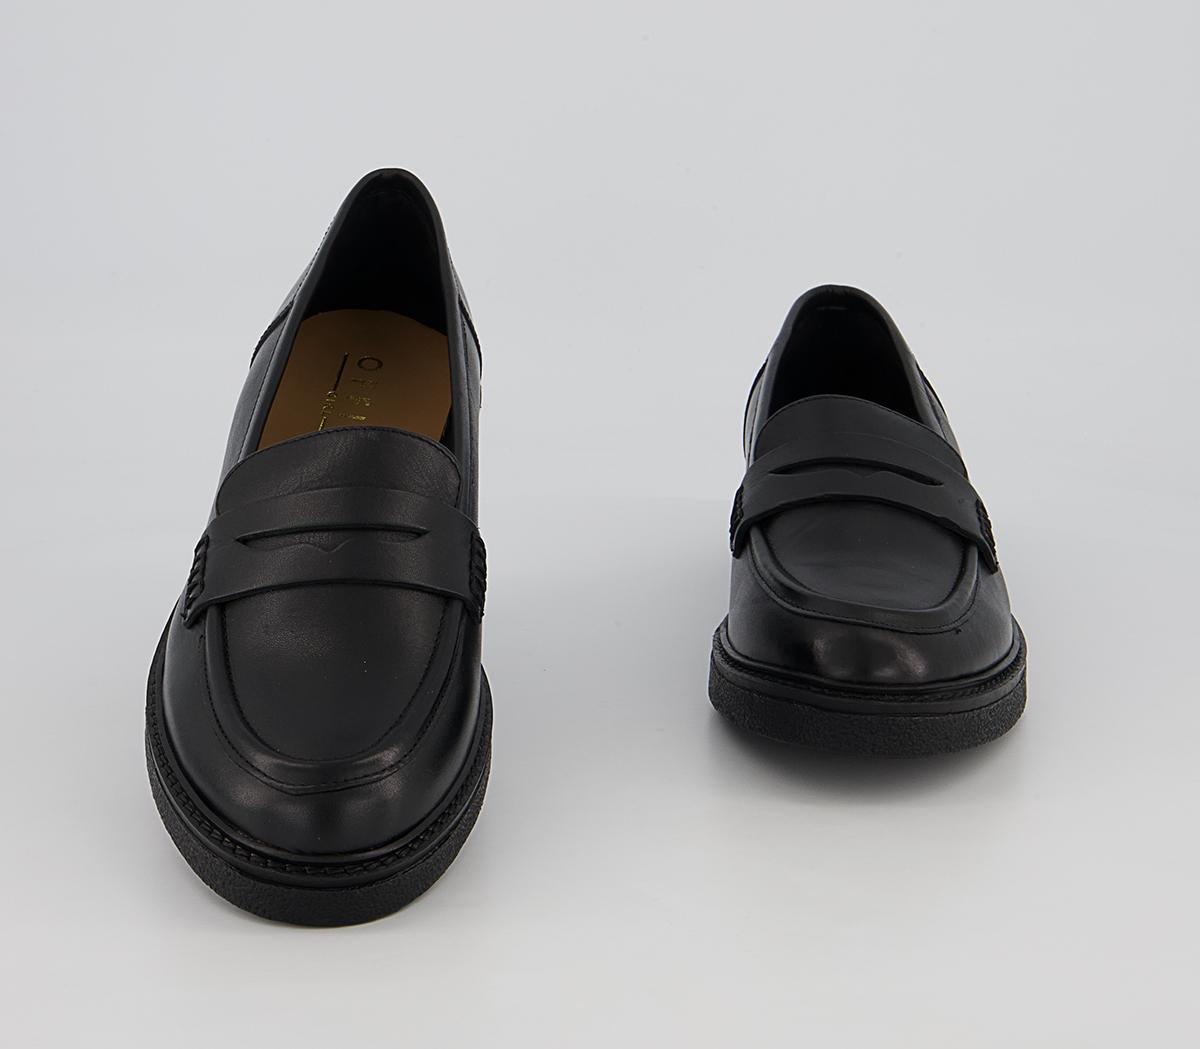 OFFICE Filter Smooth Sole Loafers Black Leather - Flat Shoes for Women